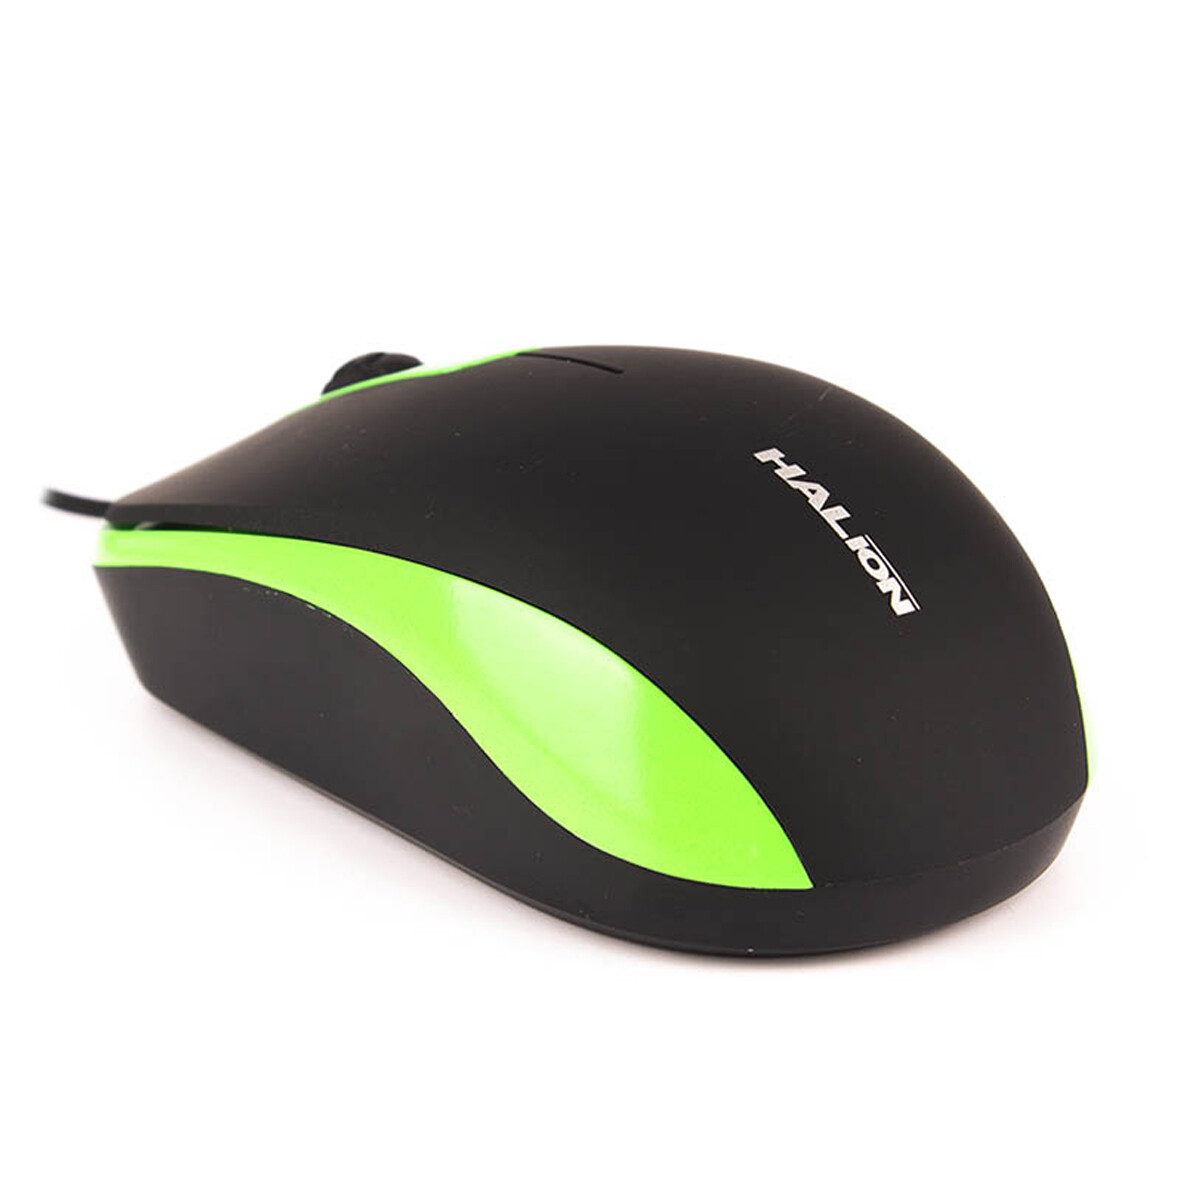 MOUSE OPTICO USB WIRED HALION RUSSO HA-M818 VERDE